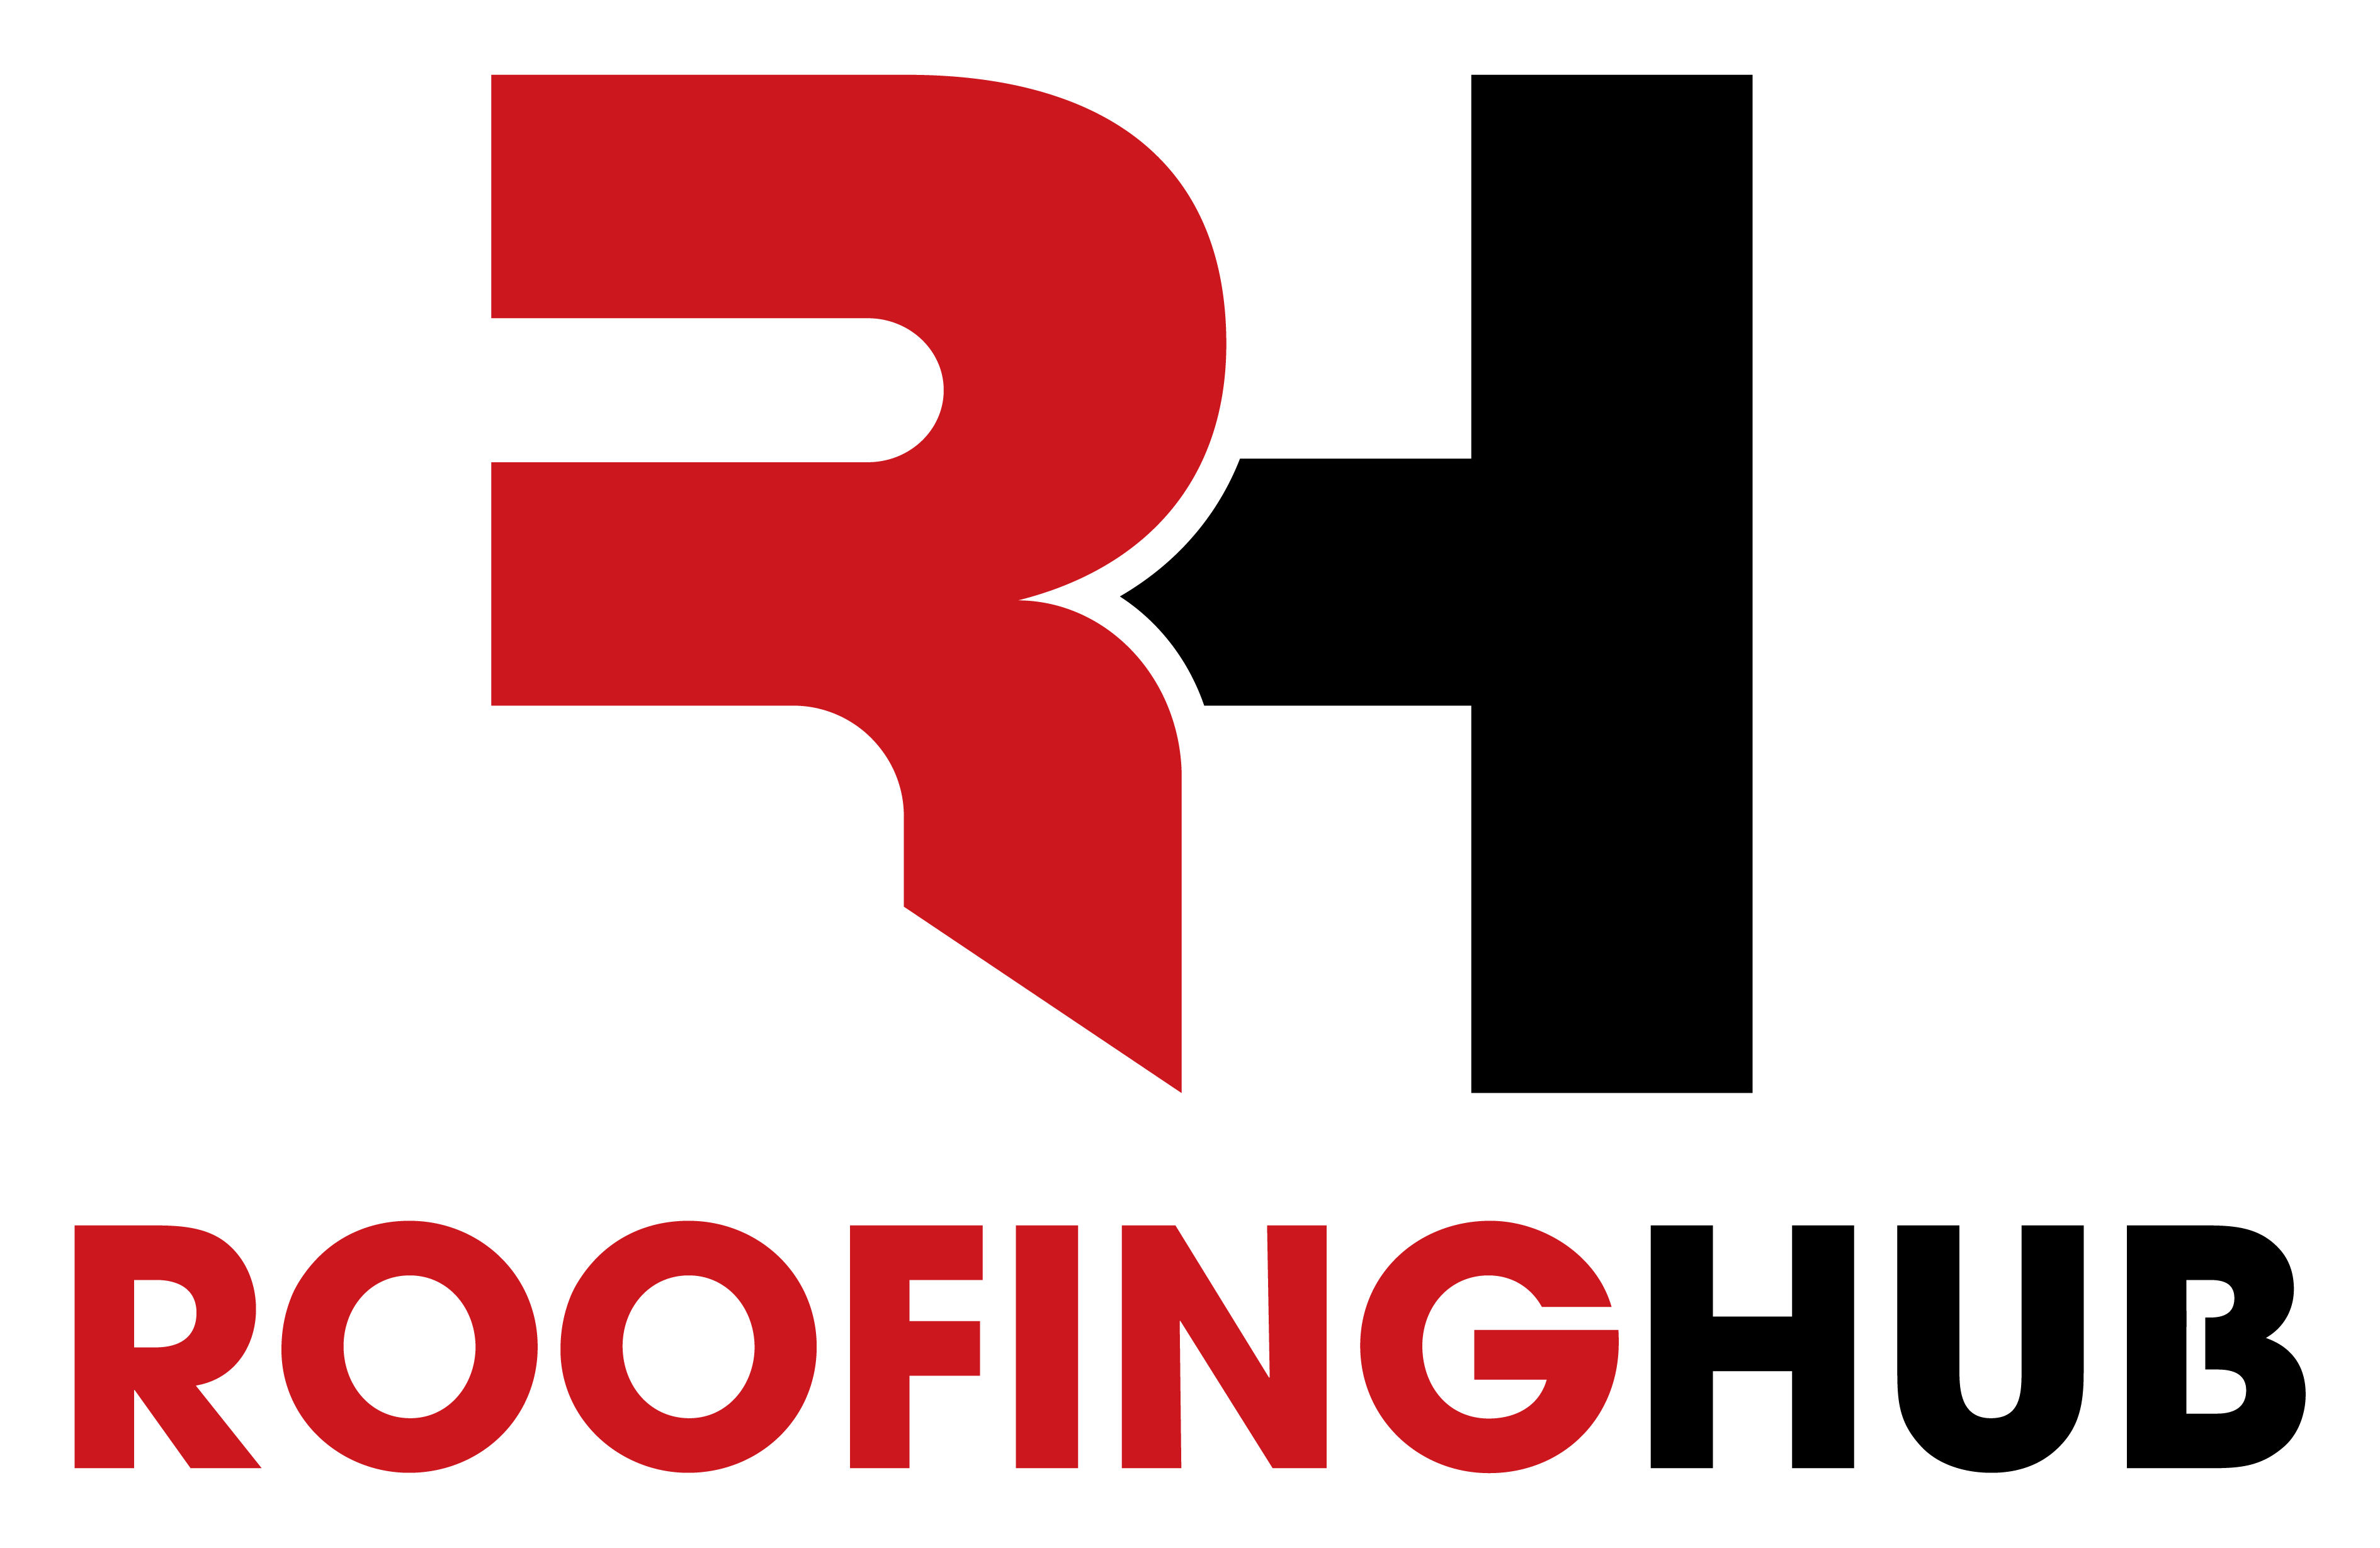 Roofing Hub Logo_Stacked